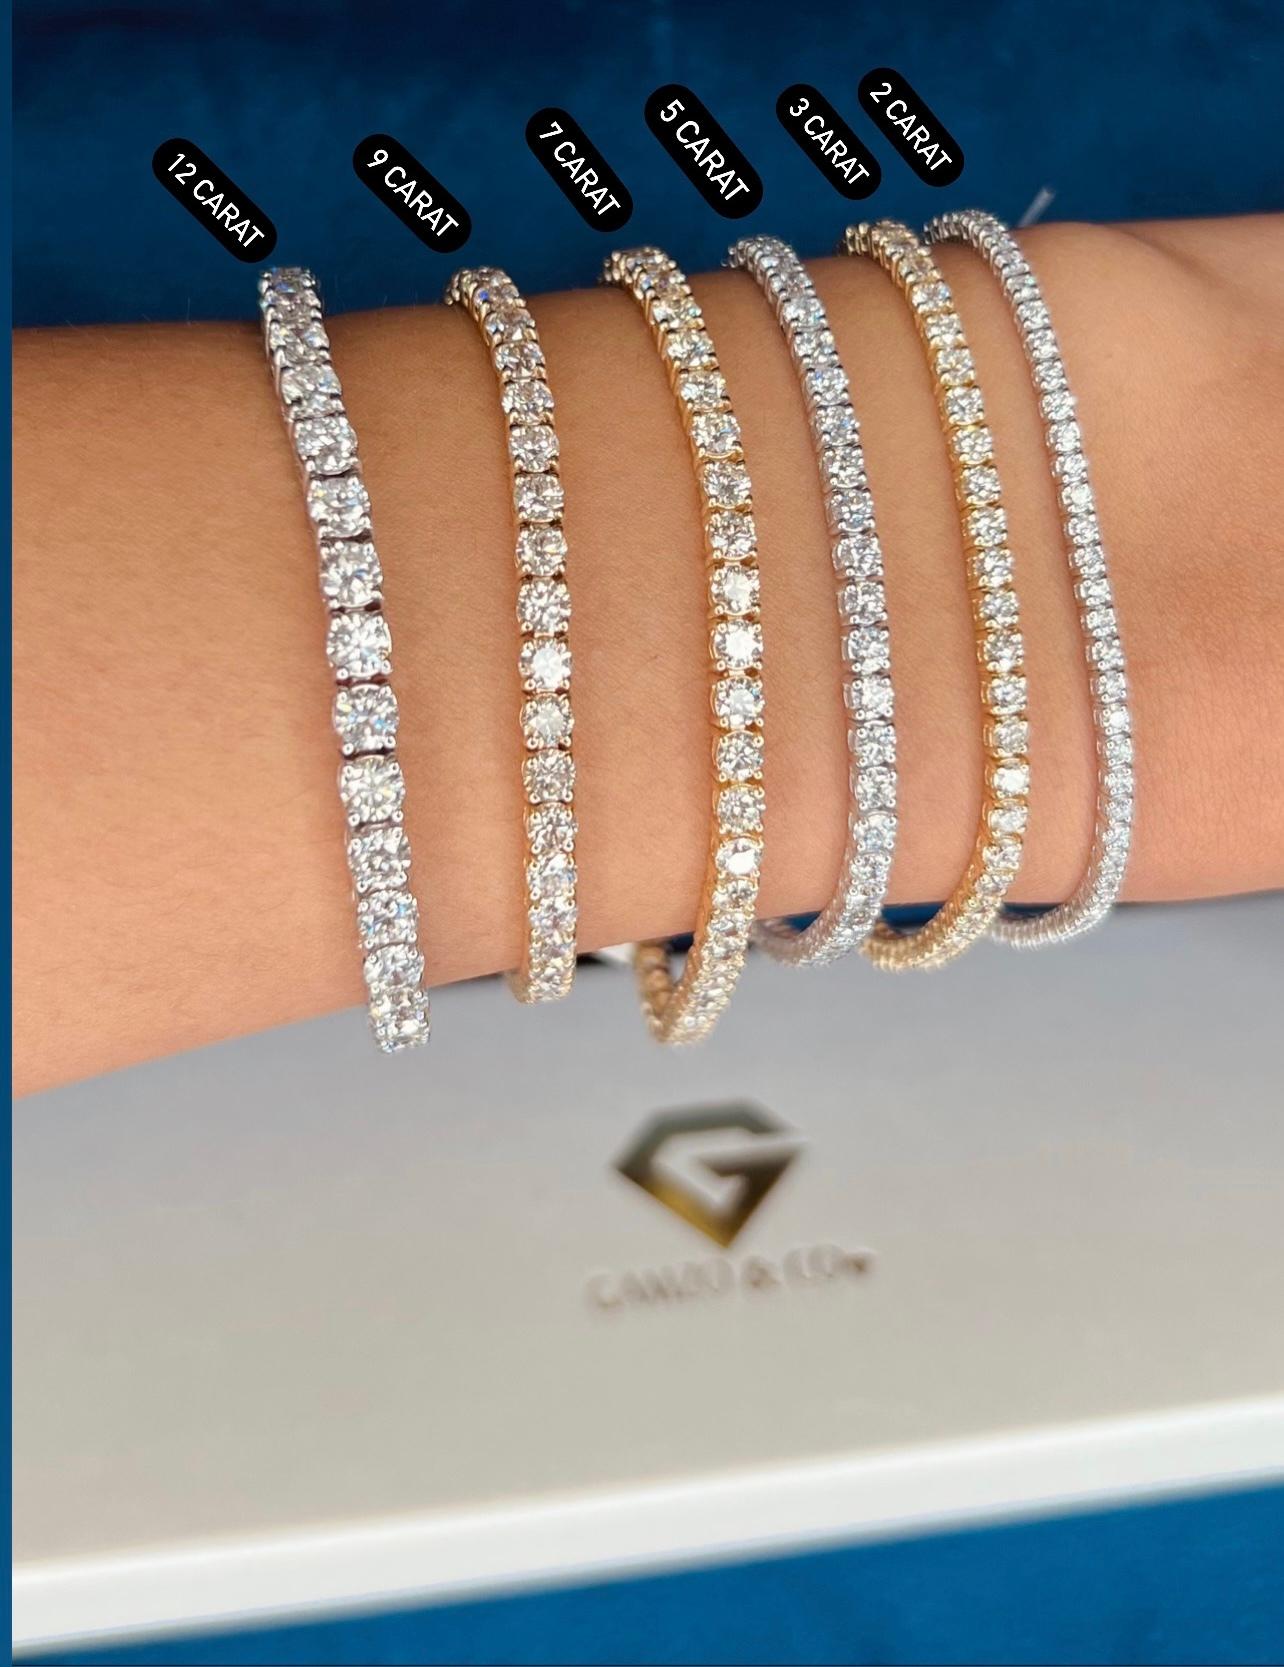 This diamond tennis bracelet features beautifully cut round diamonds set gorgeously in 14k gold.

Metal: 14k Gold
Diamond Cut: Round Natural Diamond 
Total Diamond Carats: 2ct
Diamond Clarity: VS
Diamond Color: F-G
Color: Rose Gold
Bracelet Length: